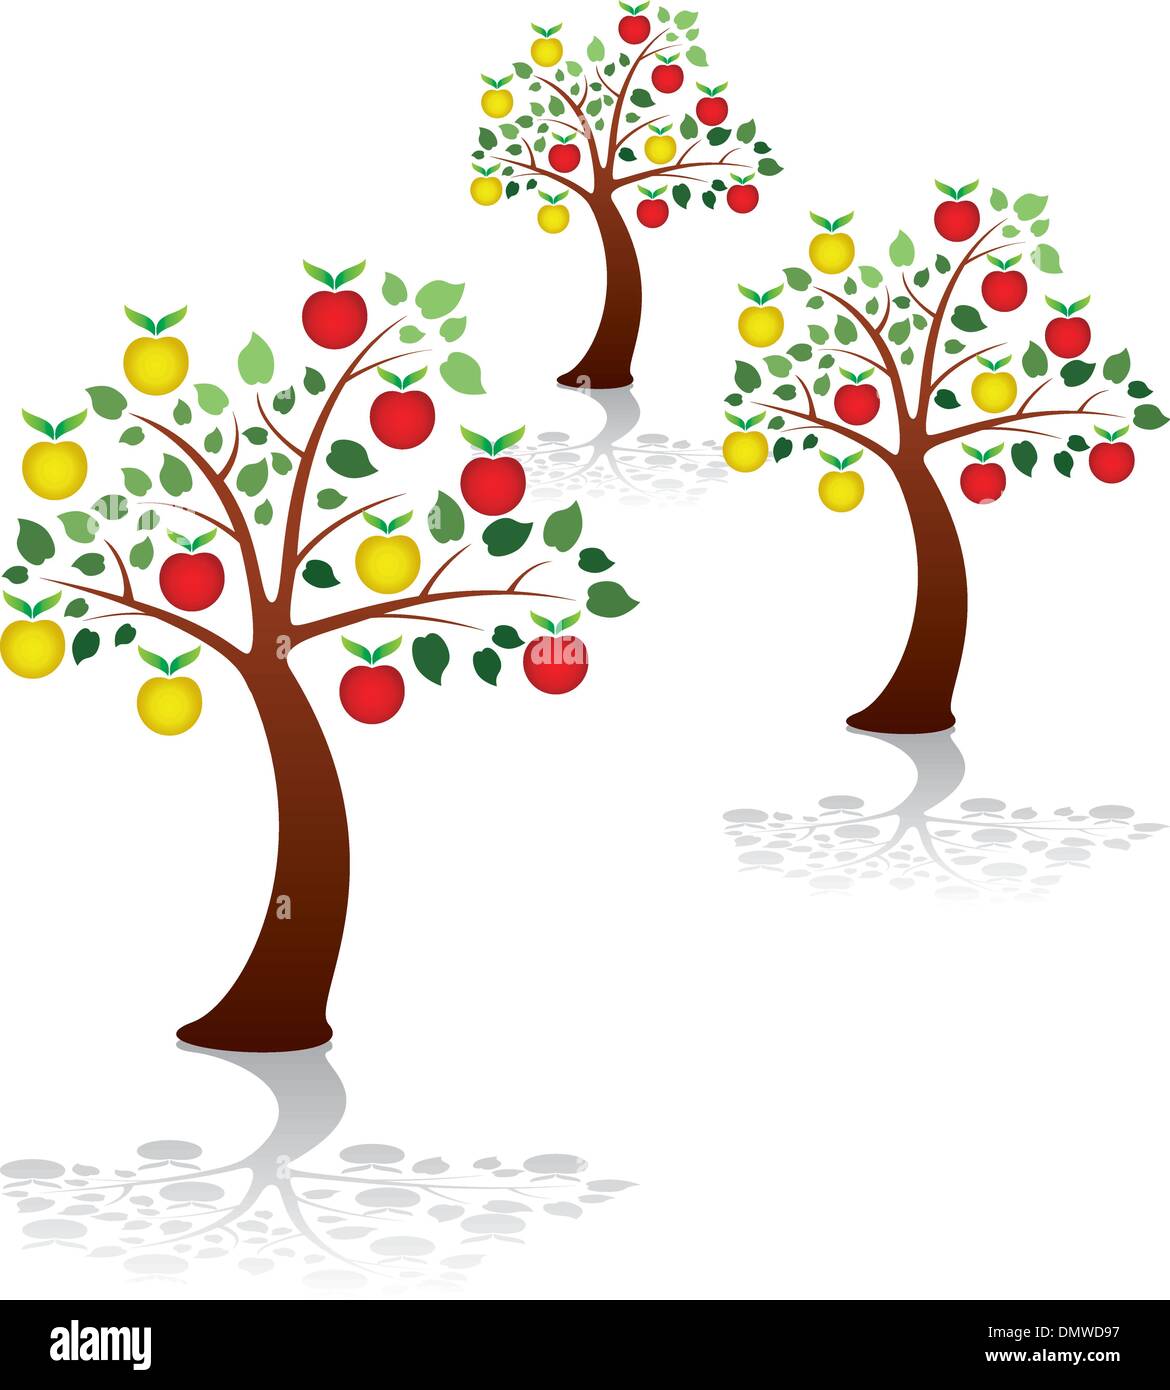 vector group of apple trees in a park or orchard Stock Vector